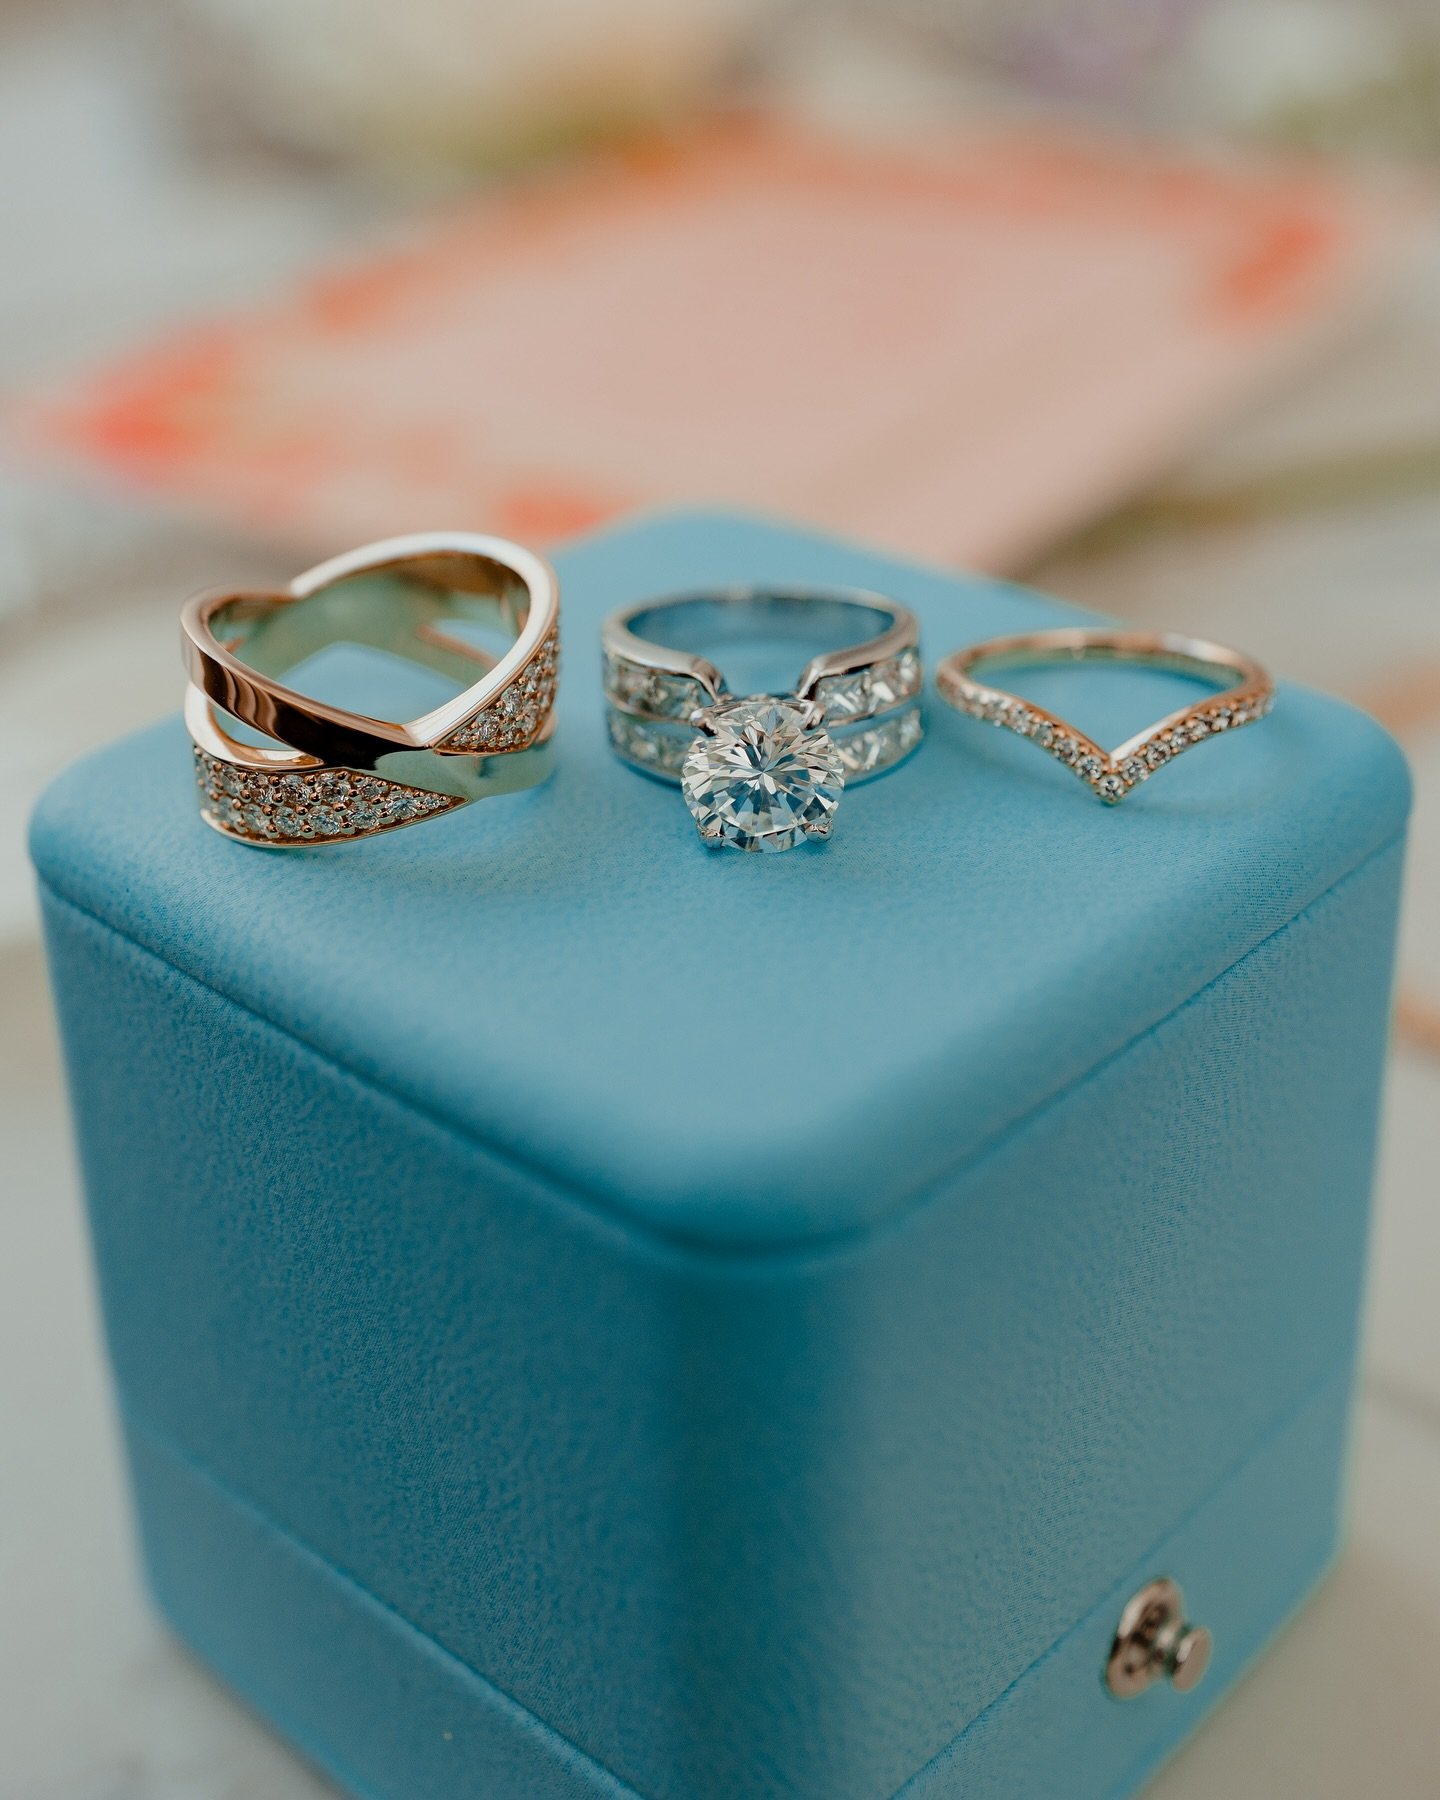 #RagoImagesProTip: Here are 5 tips for couples looking to buy diamond rings before their wedding:

1. Set a Budget: Determine a comfortable budget range before starting your search. This ensures you find a ring that meets your financial expectations 